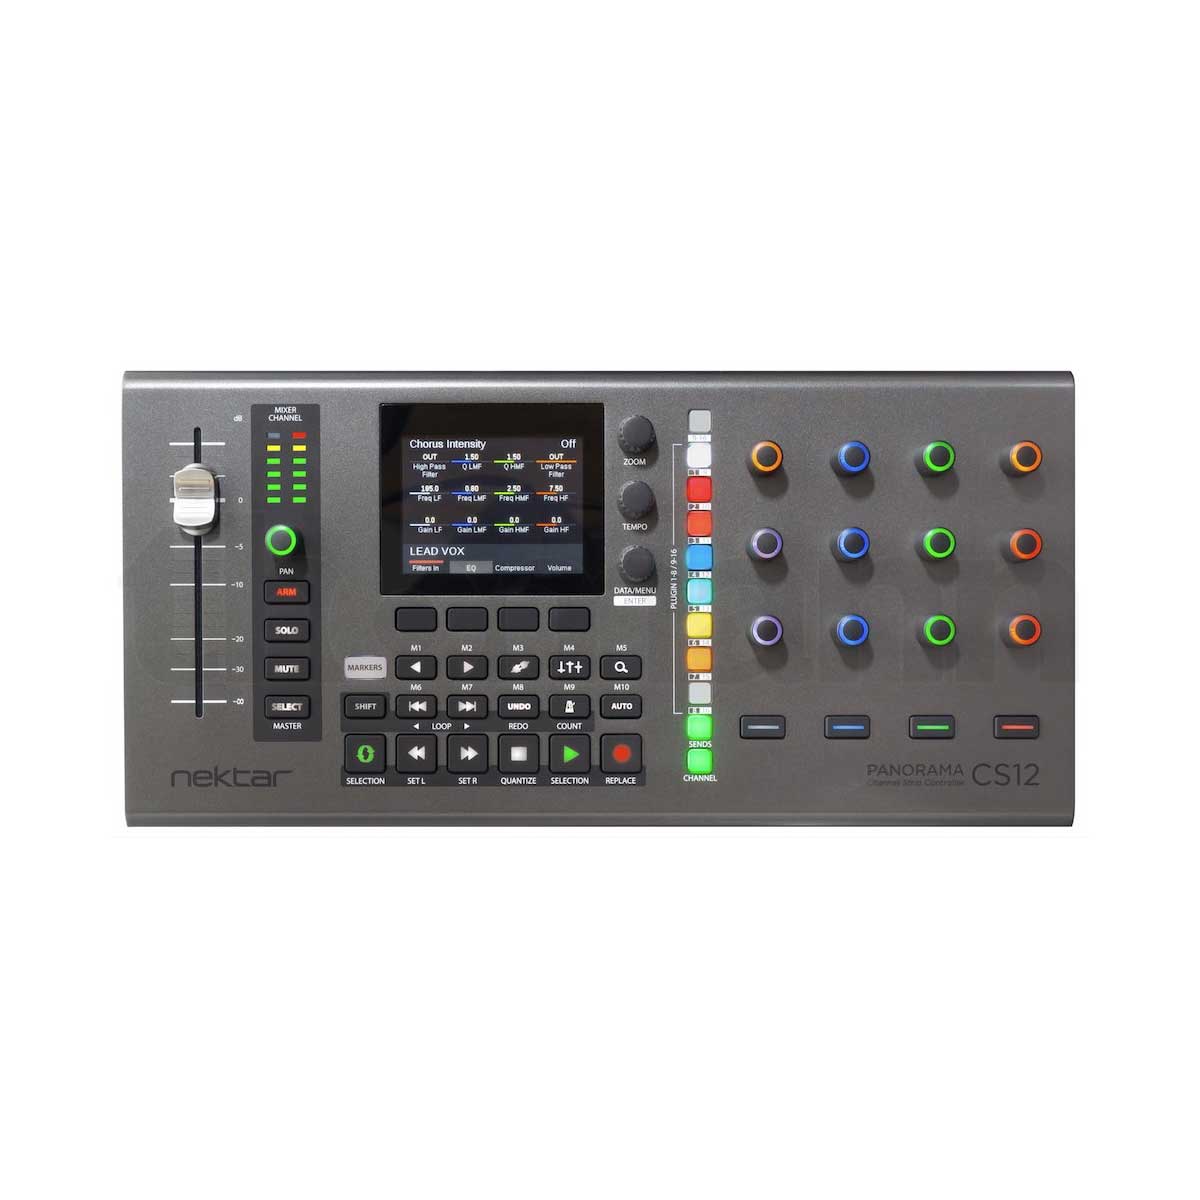 Panorama CS12 Channel Strip Controller for Logic Pro